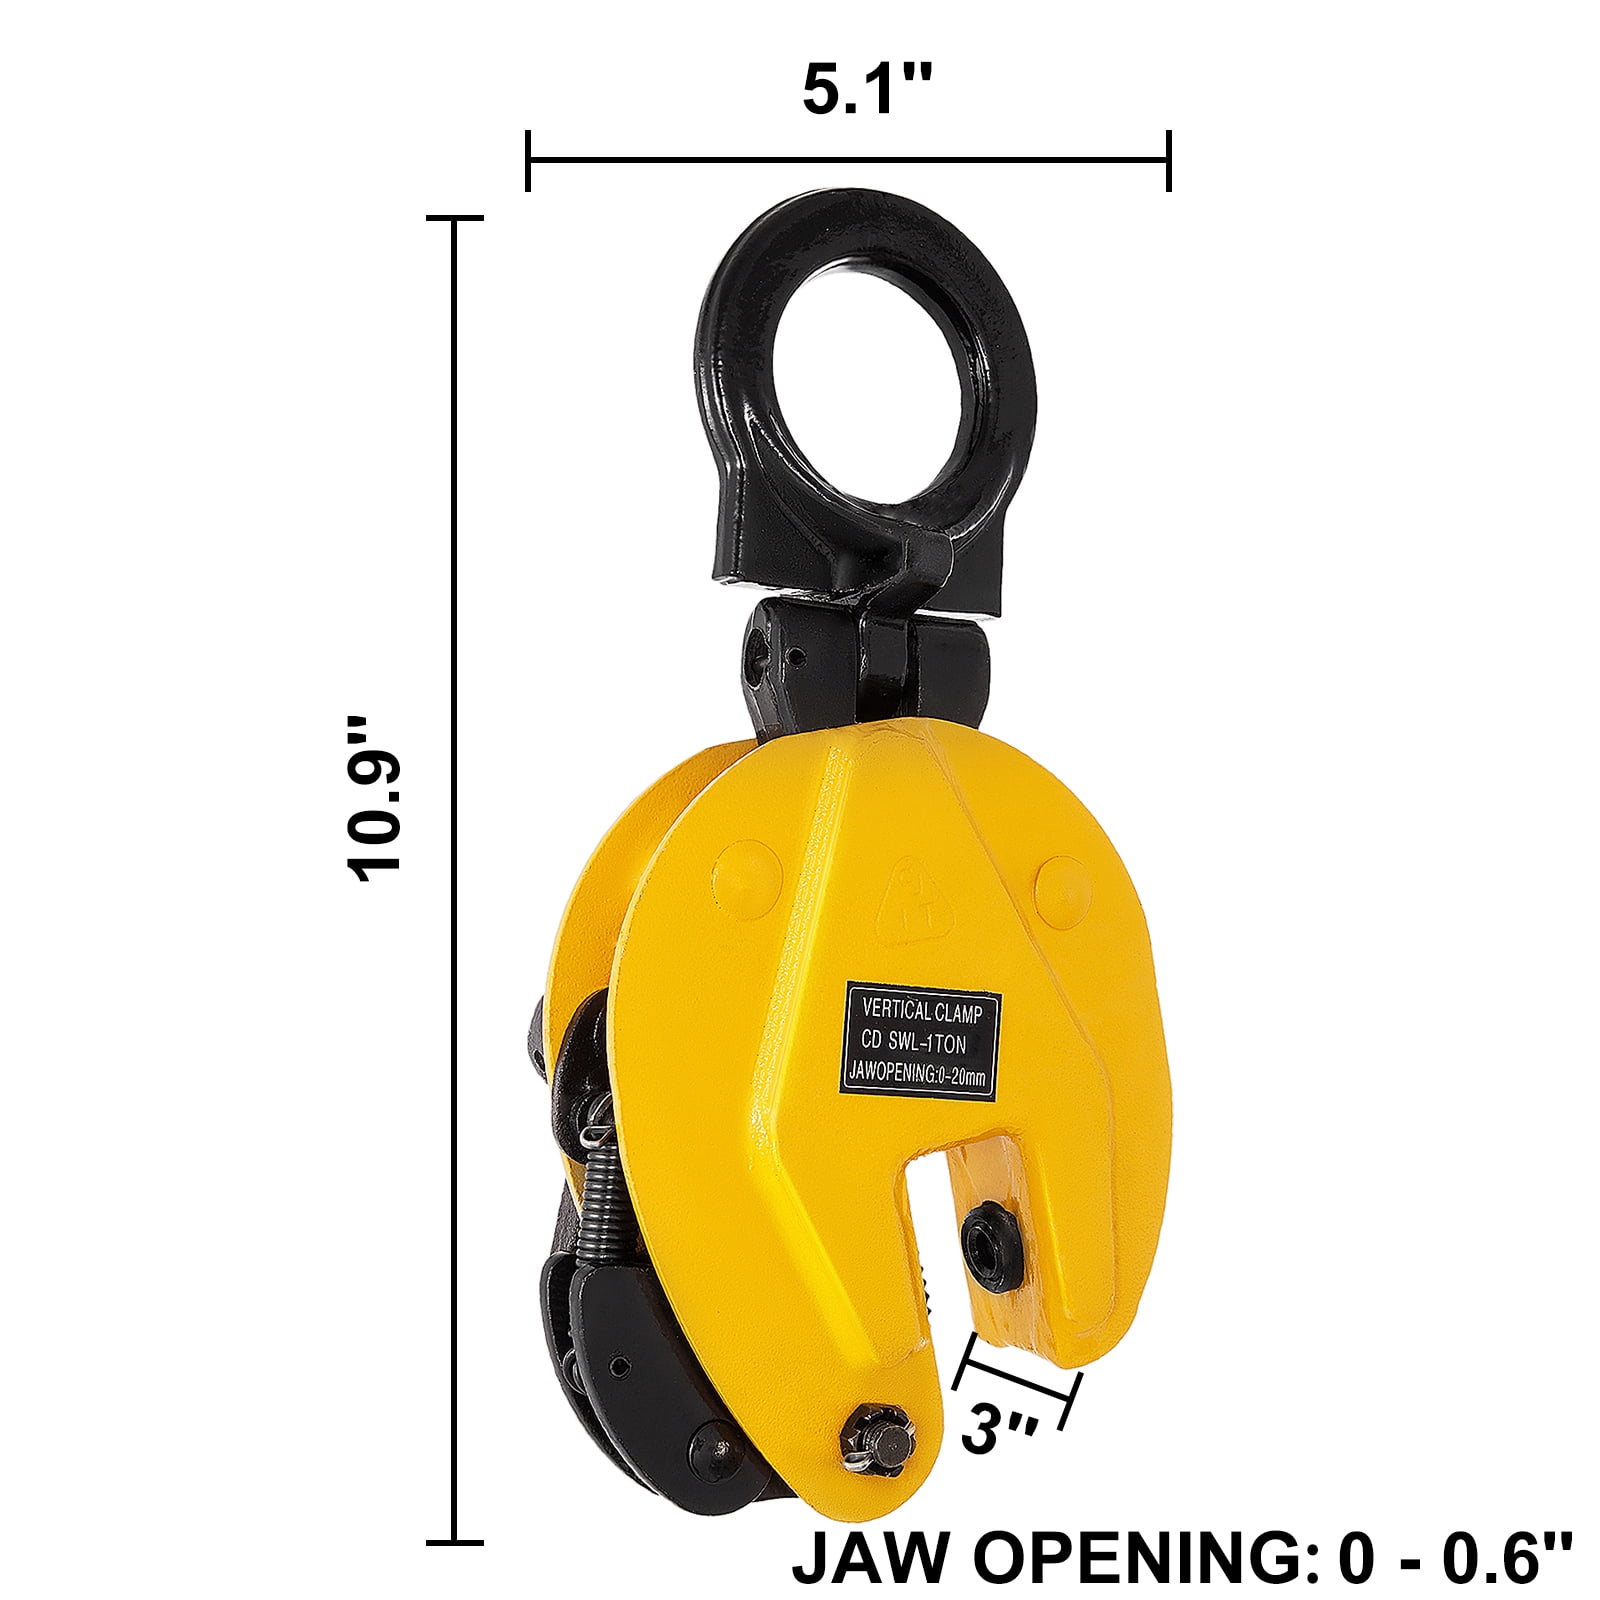 6600Lbs Working Load Limit Industrial Lifting Clamp Industrial Vertical Plate Lifting Clamp Alloy Steel 3 Tons 0-35MM w/Lock for Lifting and Transporting Vertical Plate Clamp